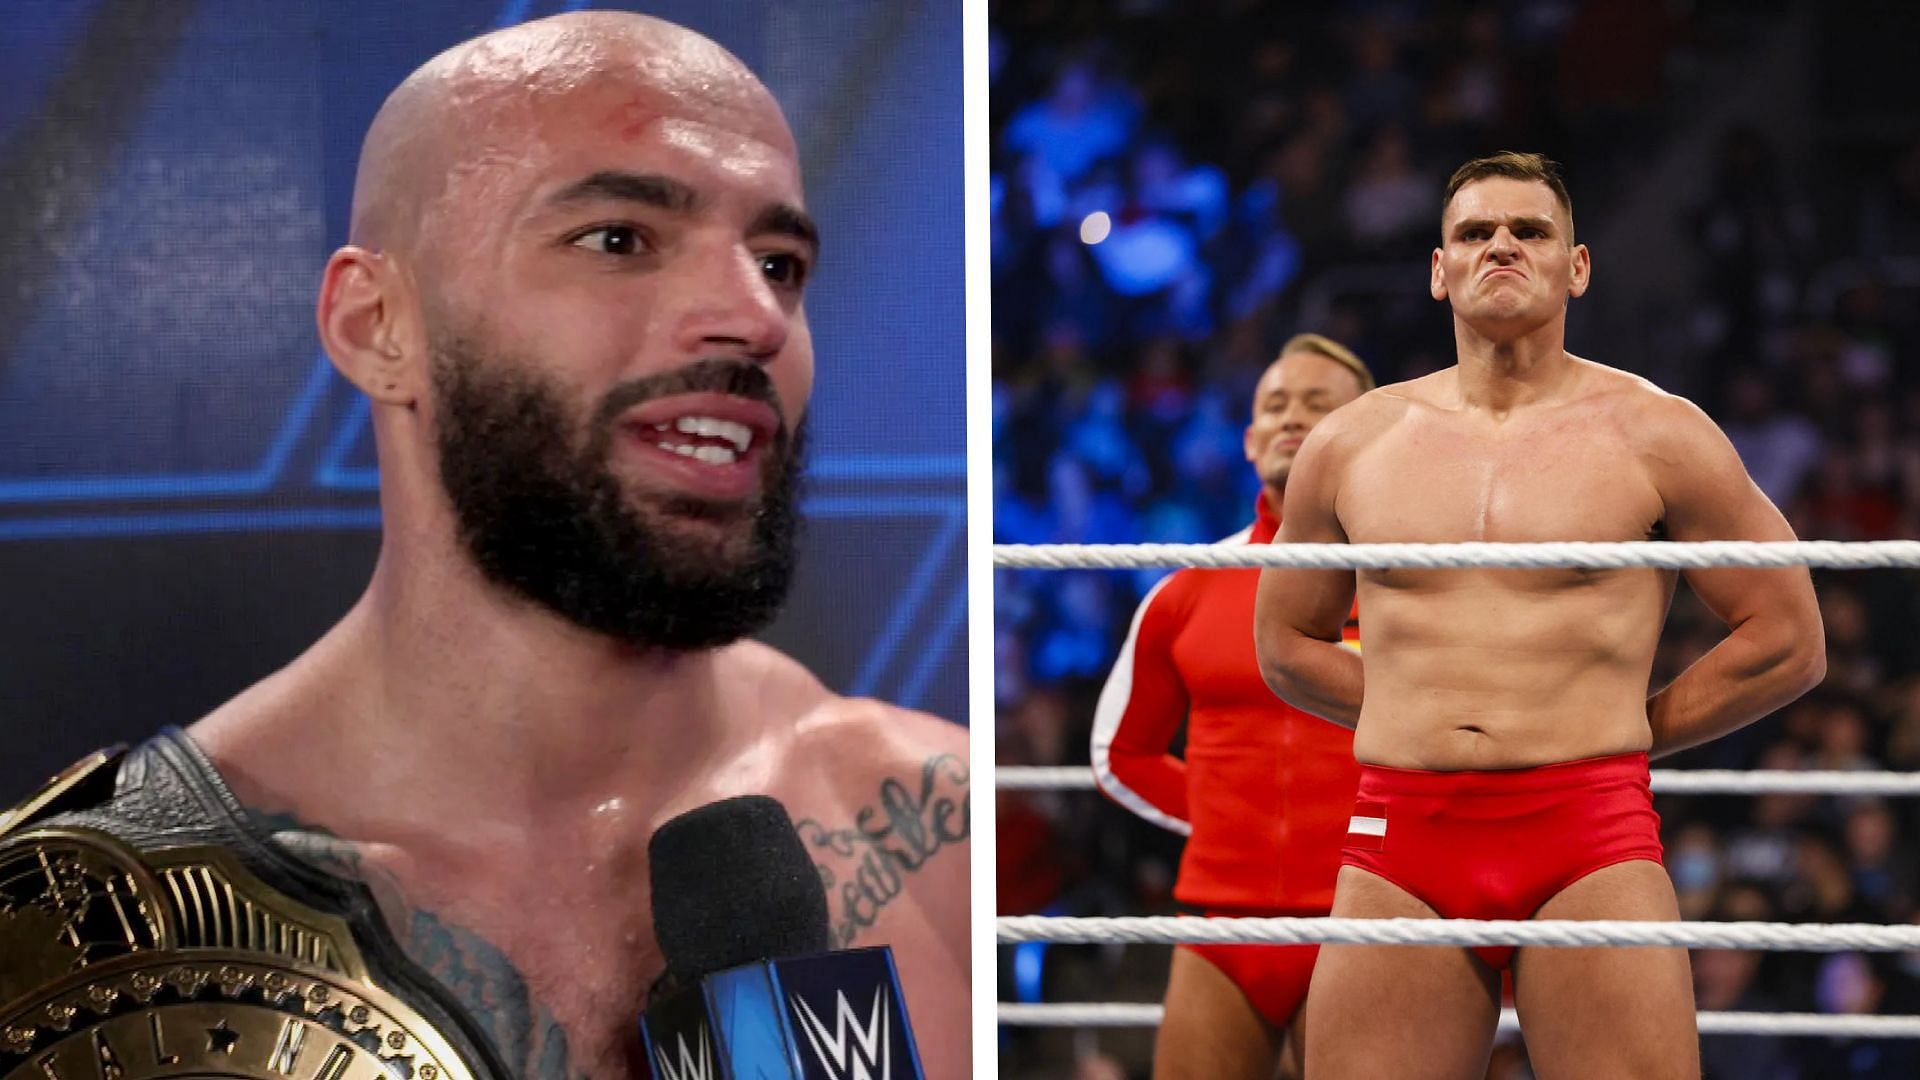 5 potential finishes for Gunther vs. Ricochet on WWE SmackDown